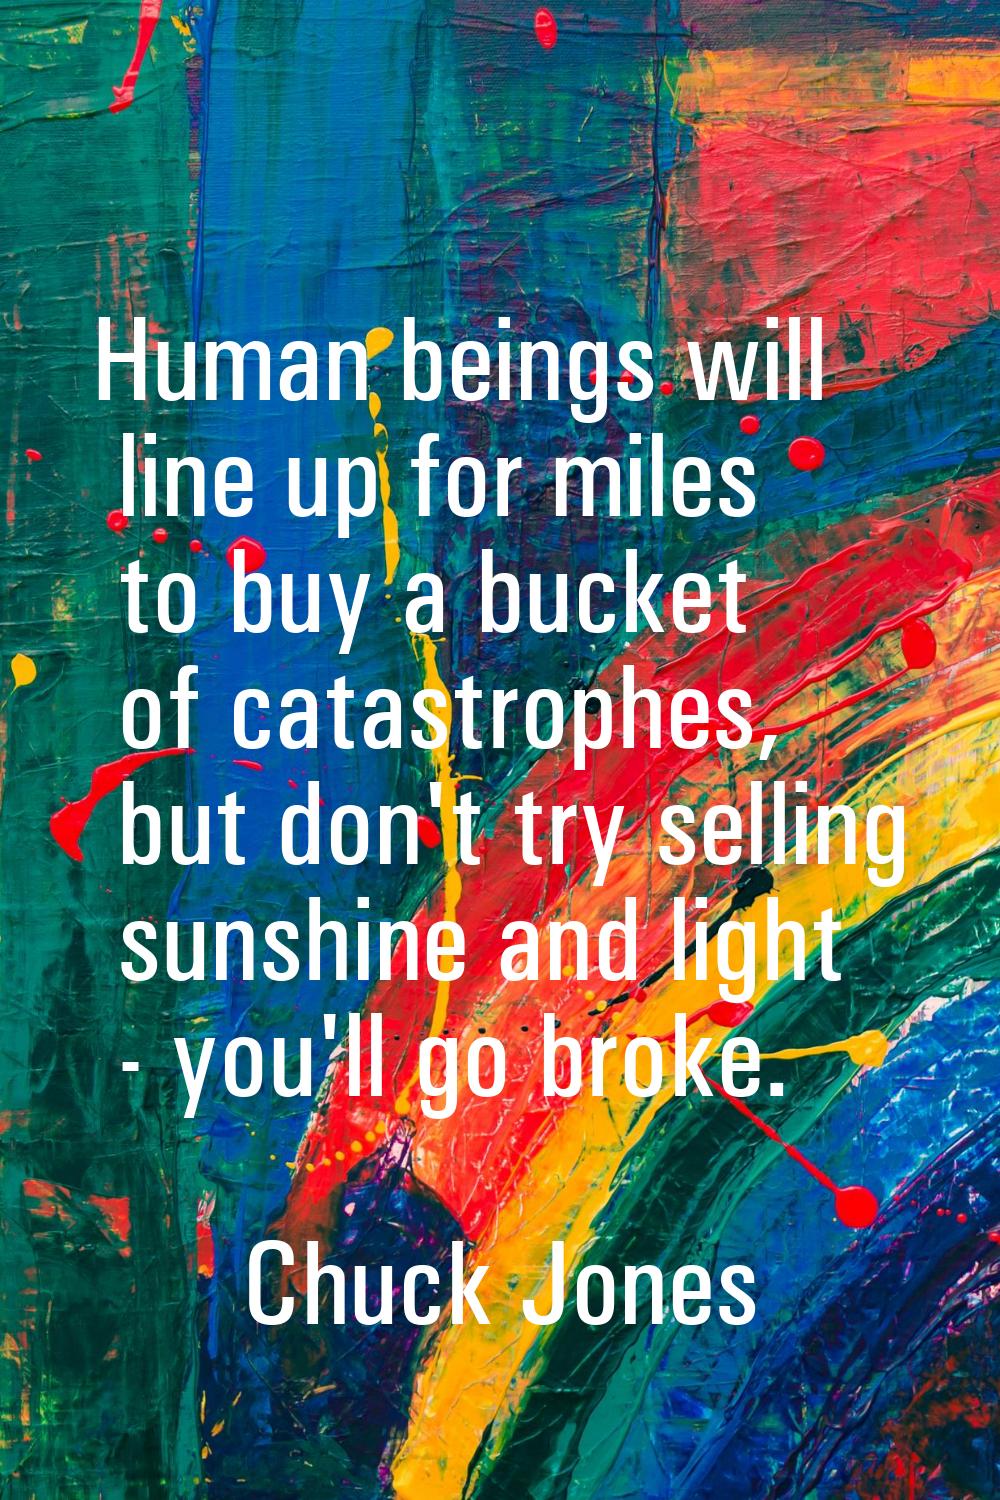 Human beings will line up for miles to buy a bucket of catastrophes, but don't try selling sunshine